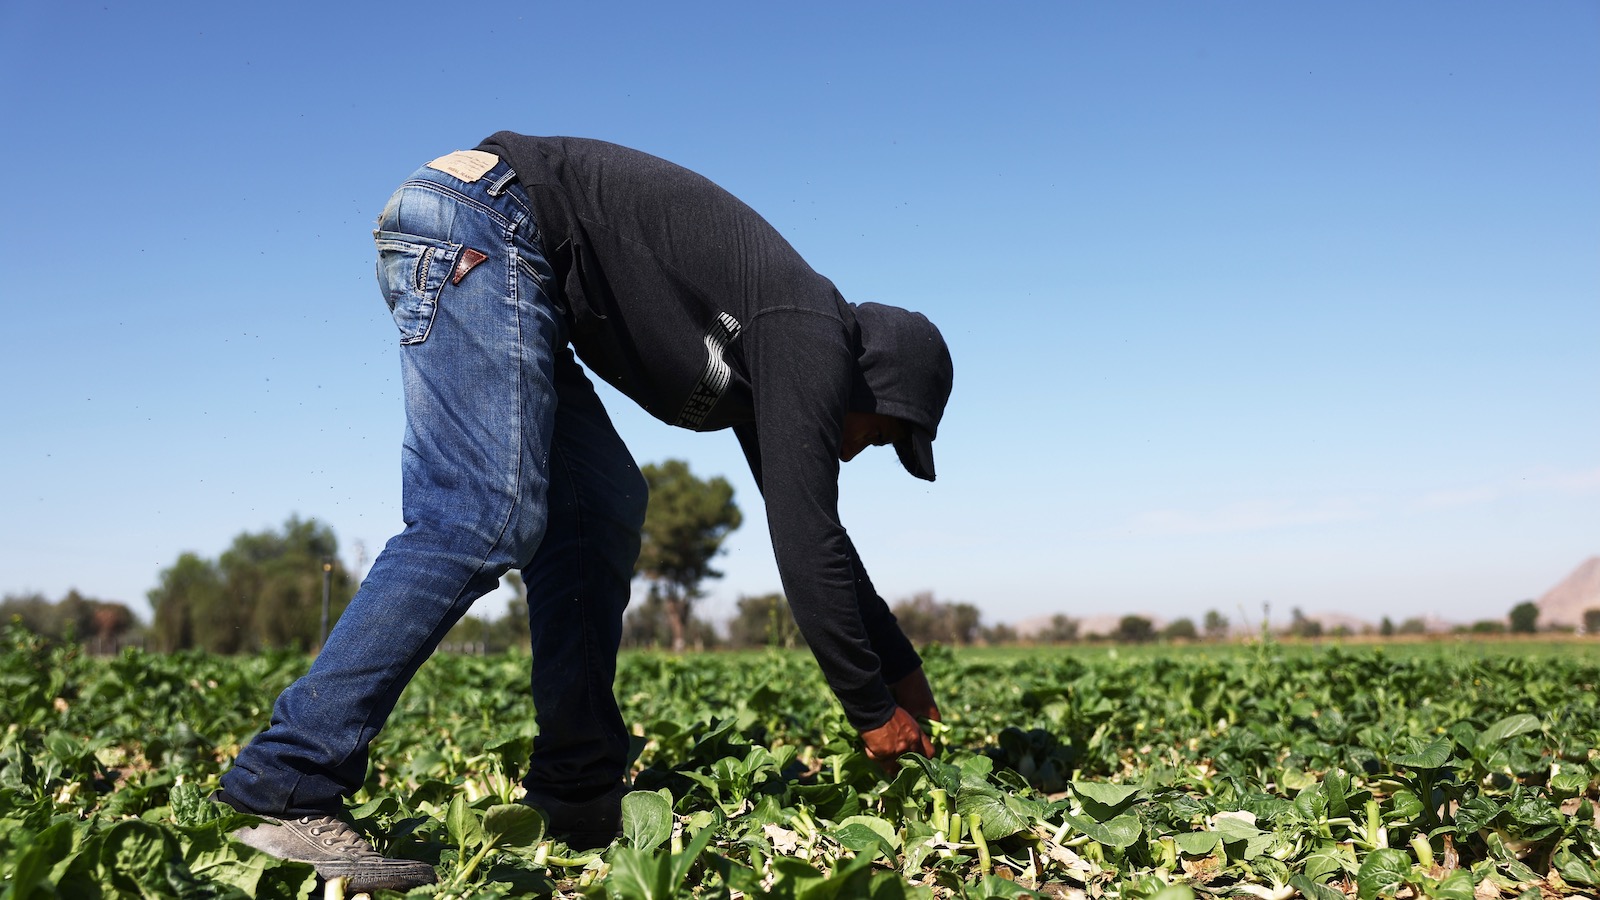 A farmworker wears protective layers while harvesting produce in the summer heat